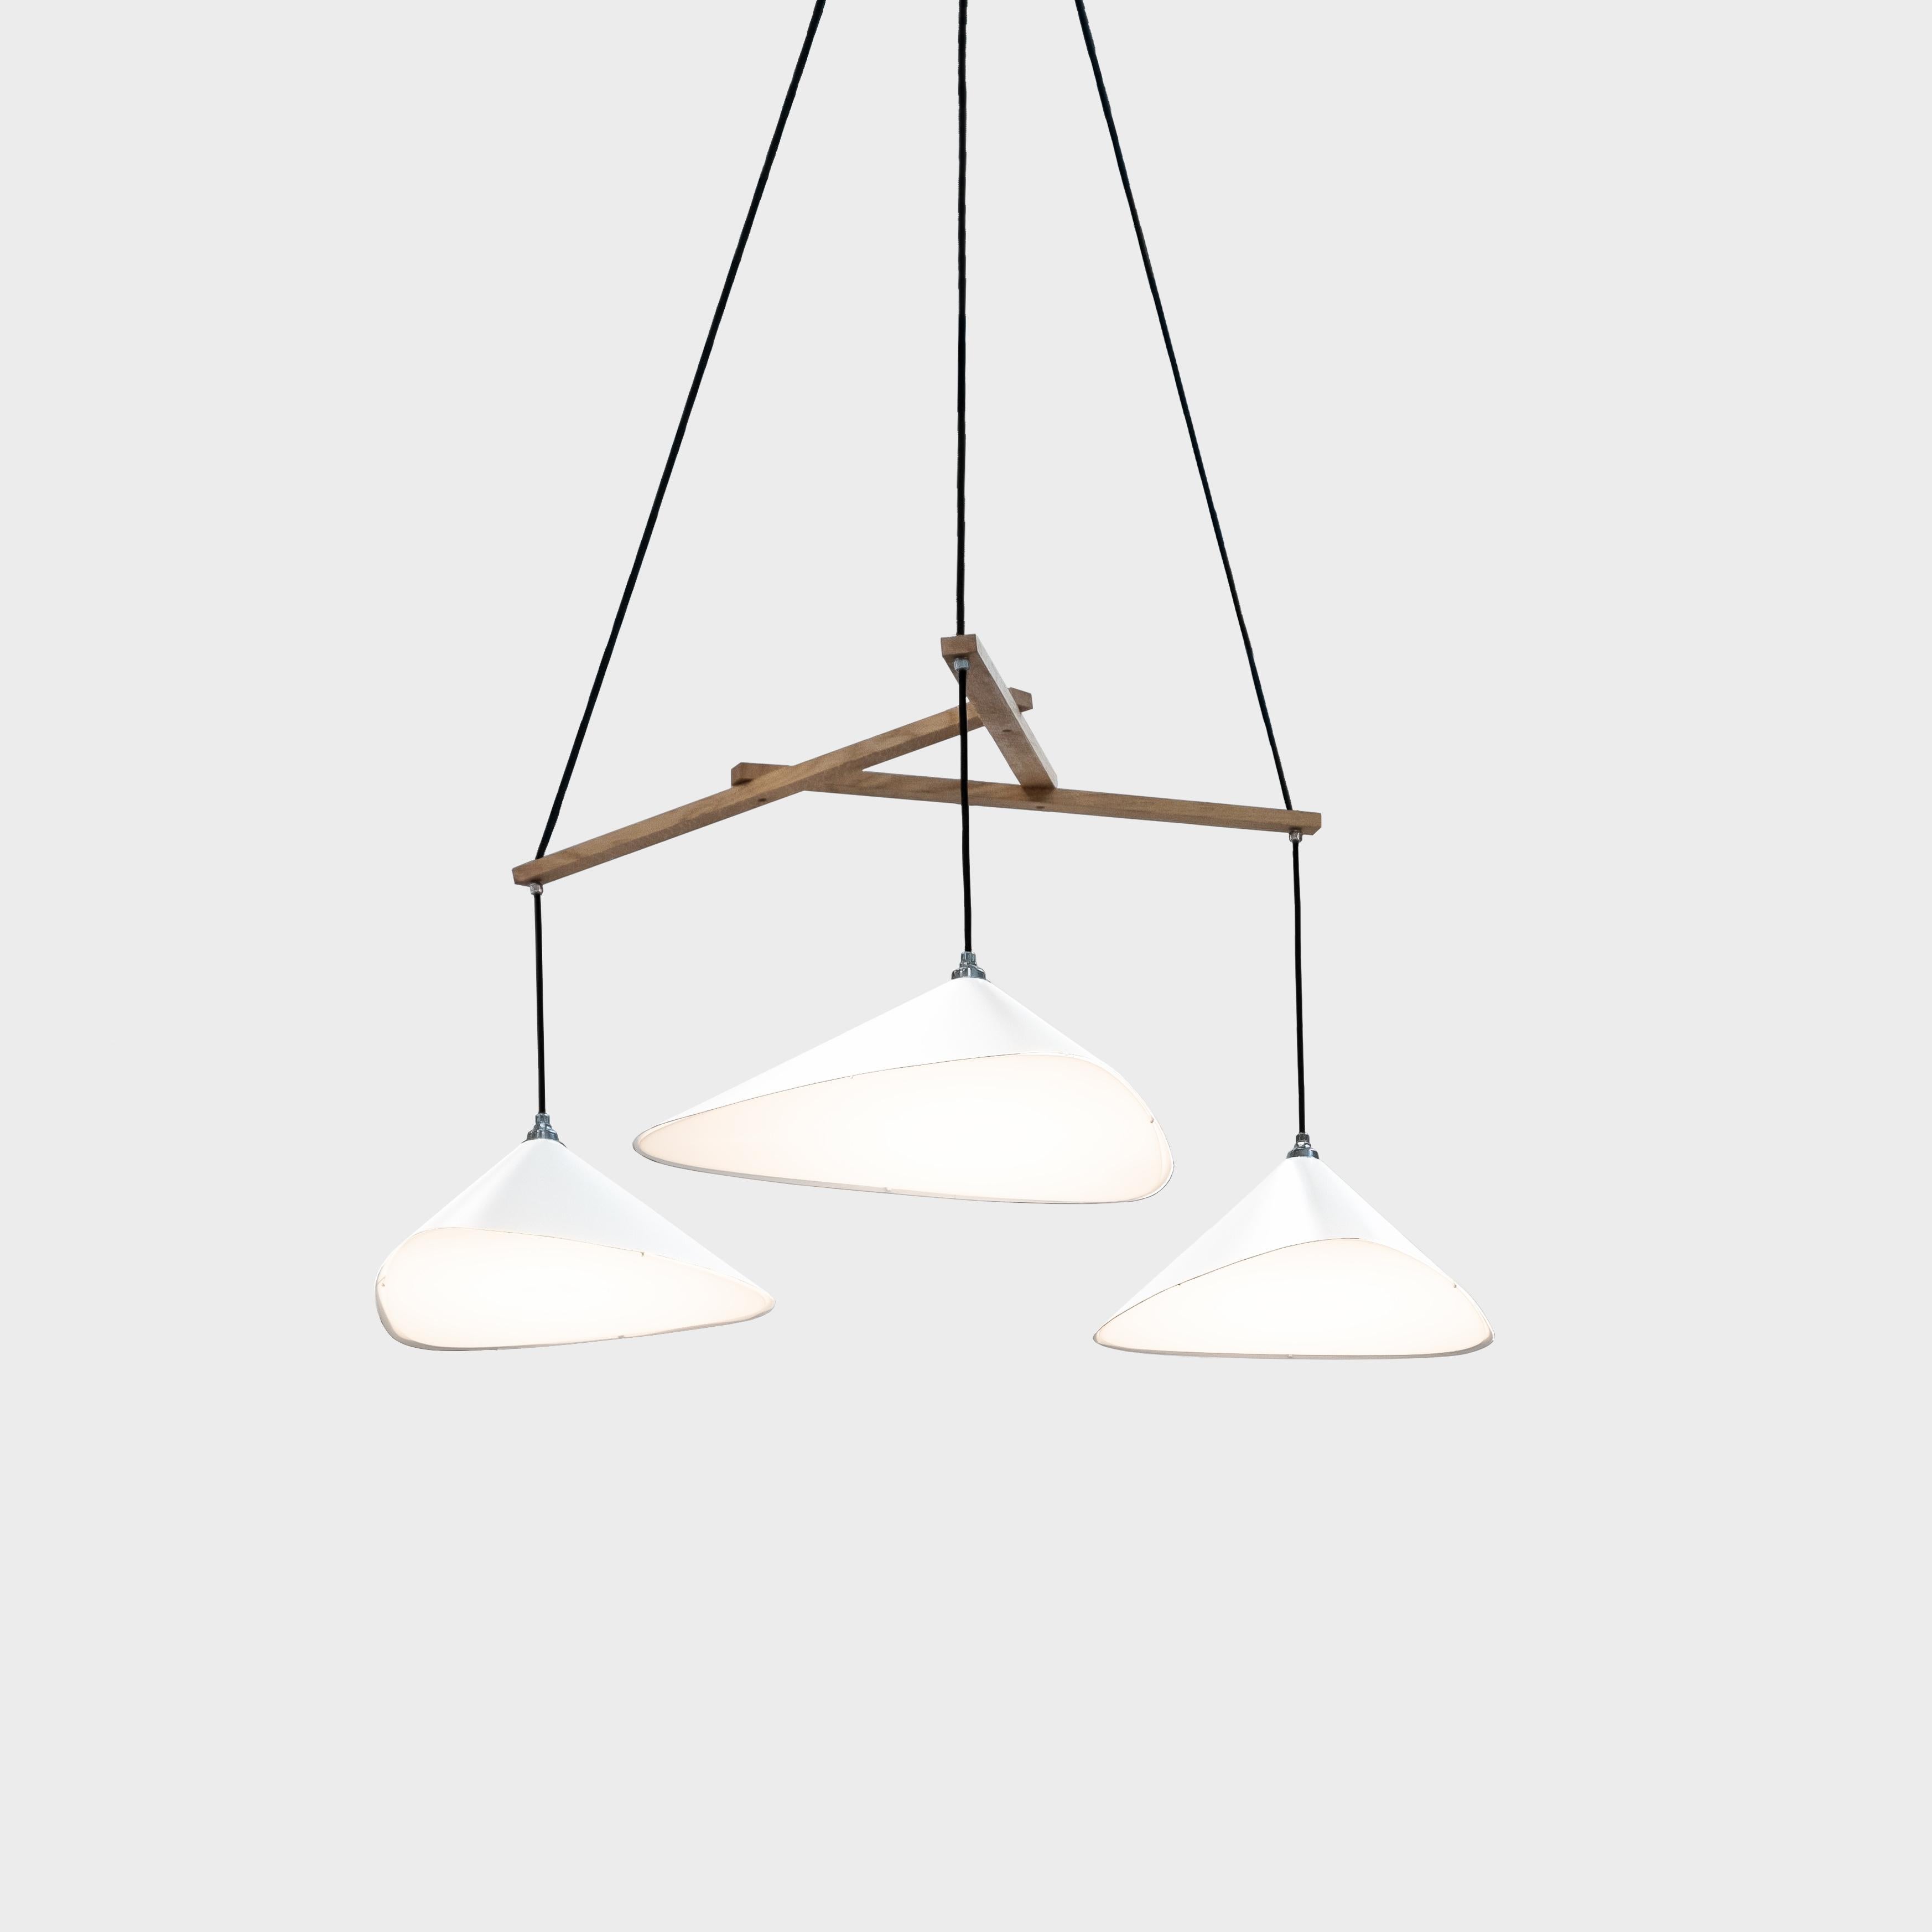 Daniel Becker 'Emily 3' chandelier in matte white for Moss Objects. Designed by Berlin luminary Daniel Becker and handmade to order using mid-century manufacturing techniques. Executed in high-quality sheet metal with anthracite matte white paint, a